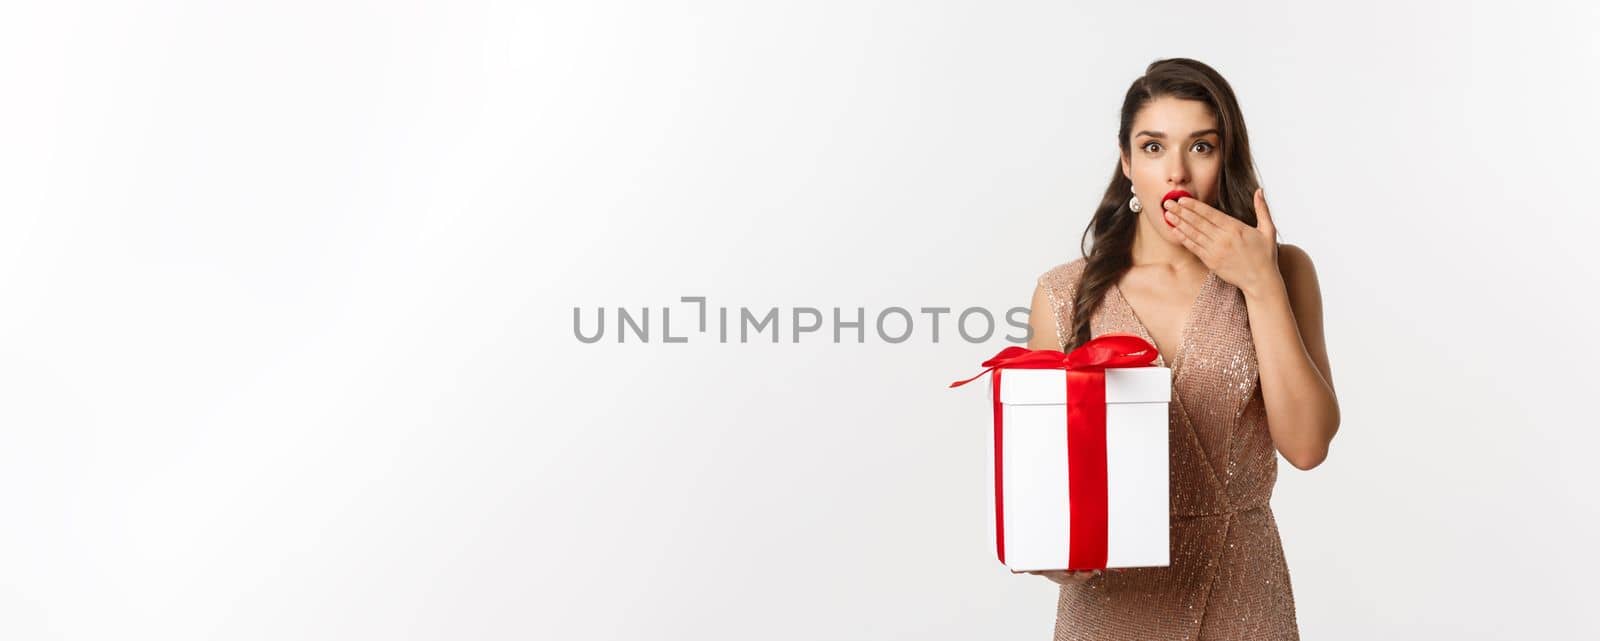 Merry Christmas. Beautiful woman looking surprised and holding gift, receiving new year presents, standing in luxury dress, standing over white background.